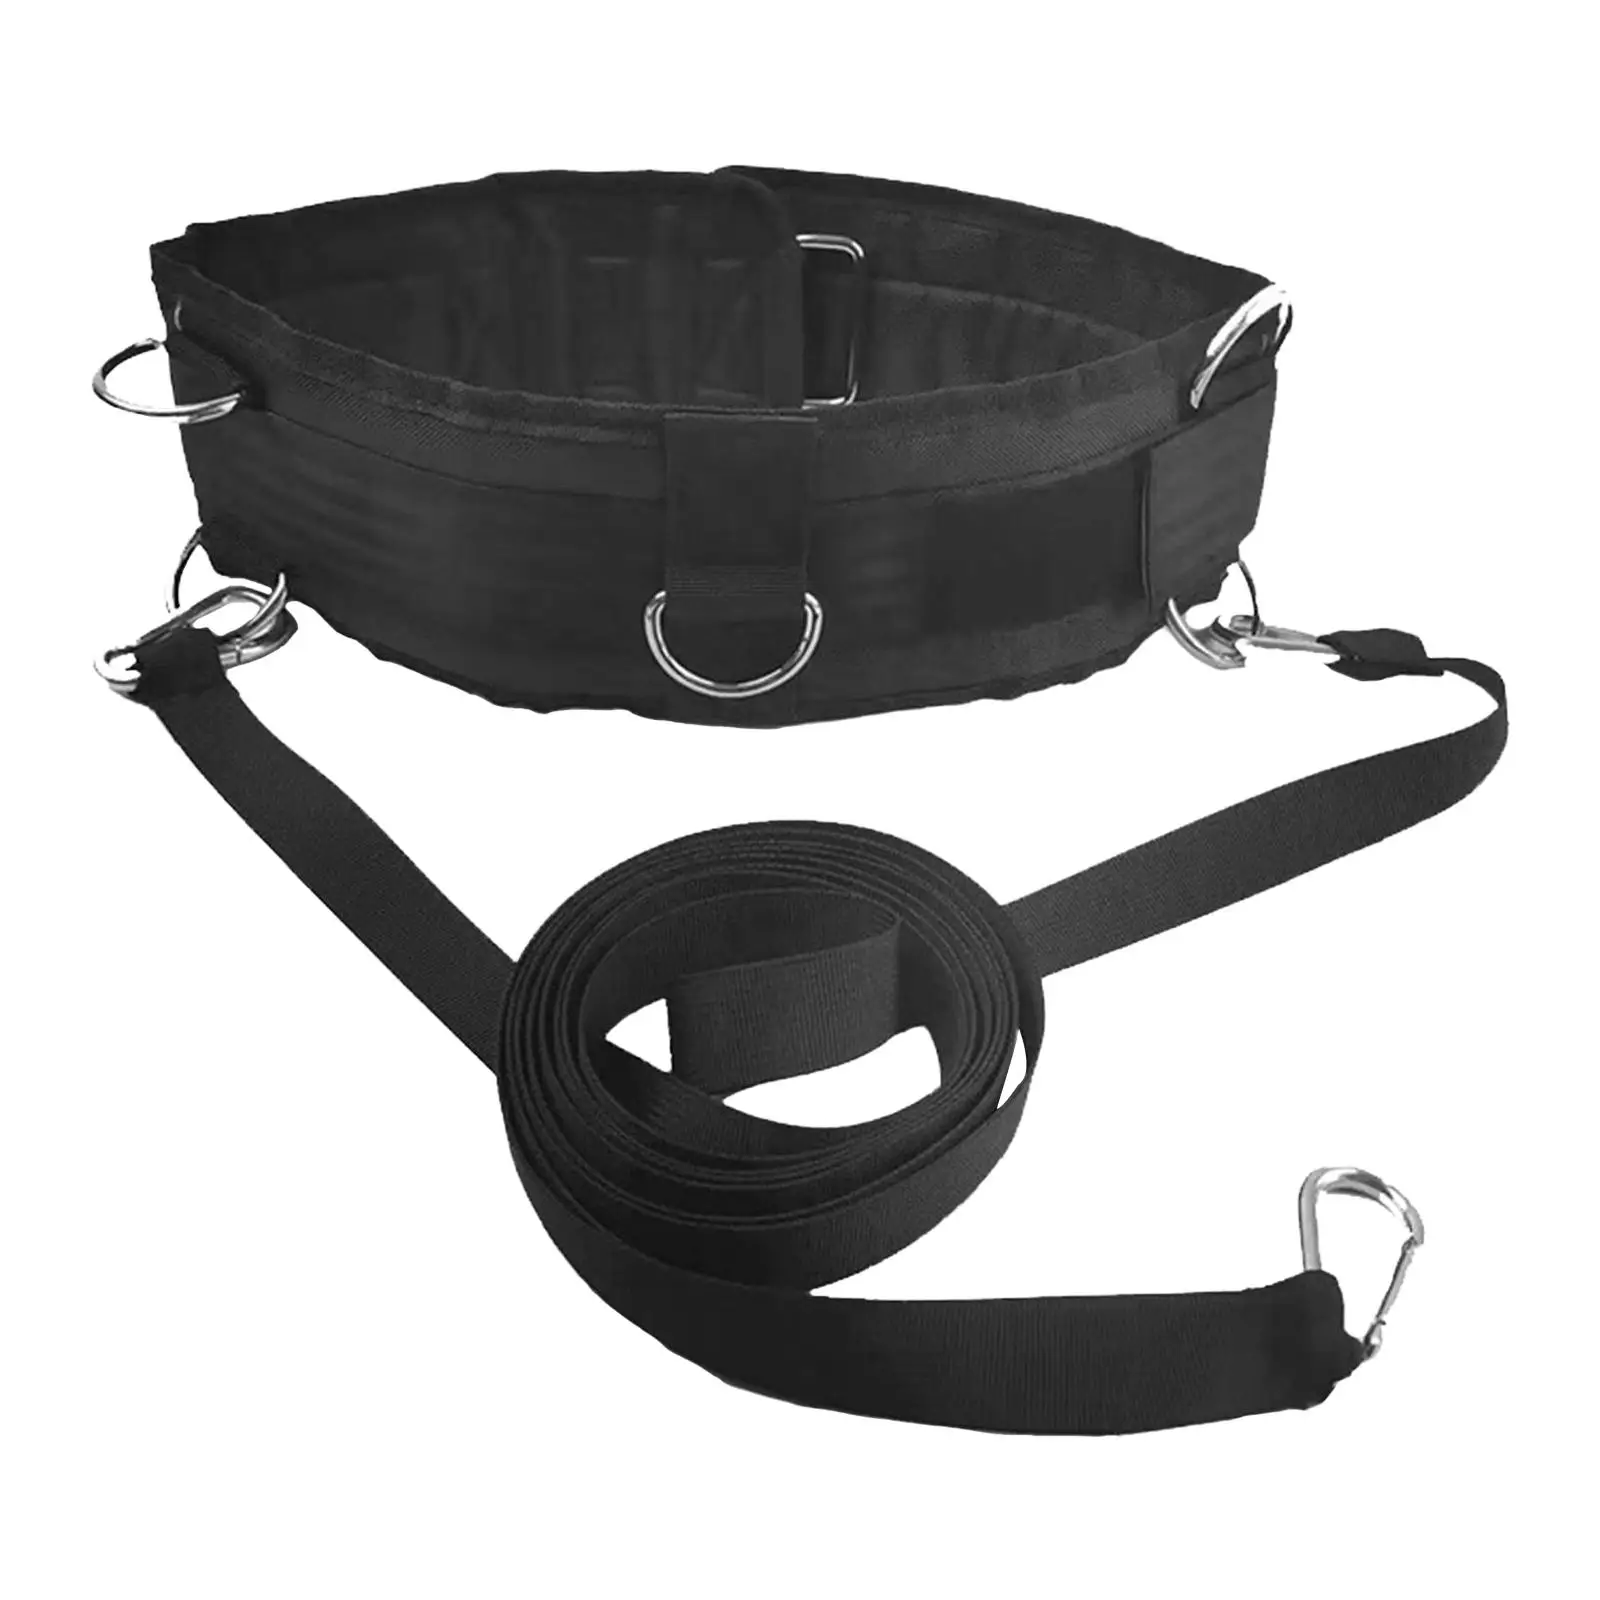 Waist Belt for Pulling Sled Trainer Rope Exercise Body Stretching Resistance Band for Baseball Strength Speed Agility Training